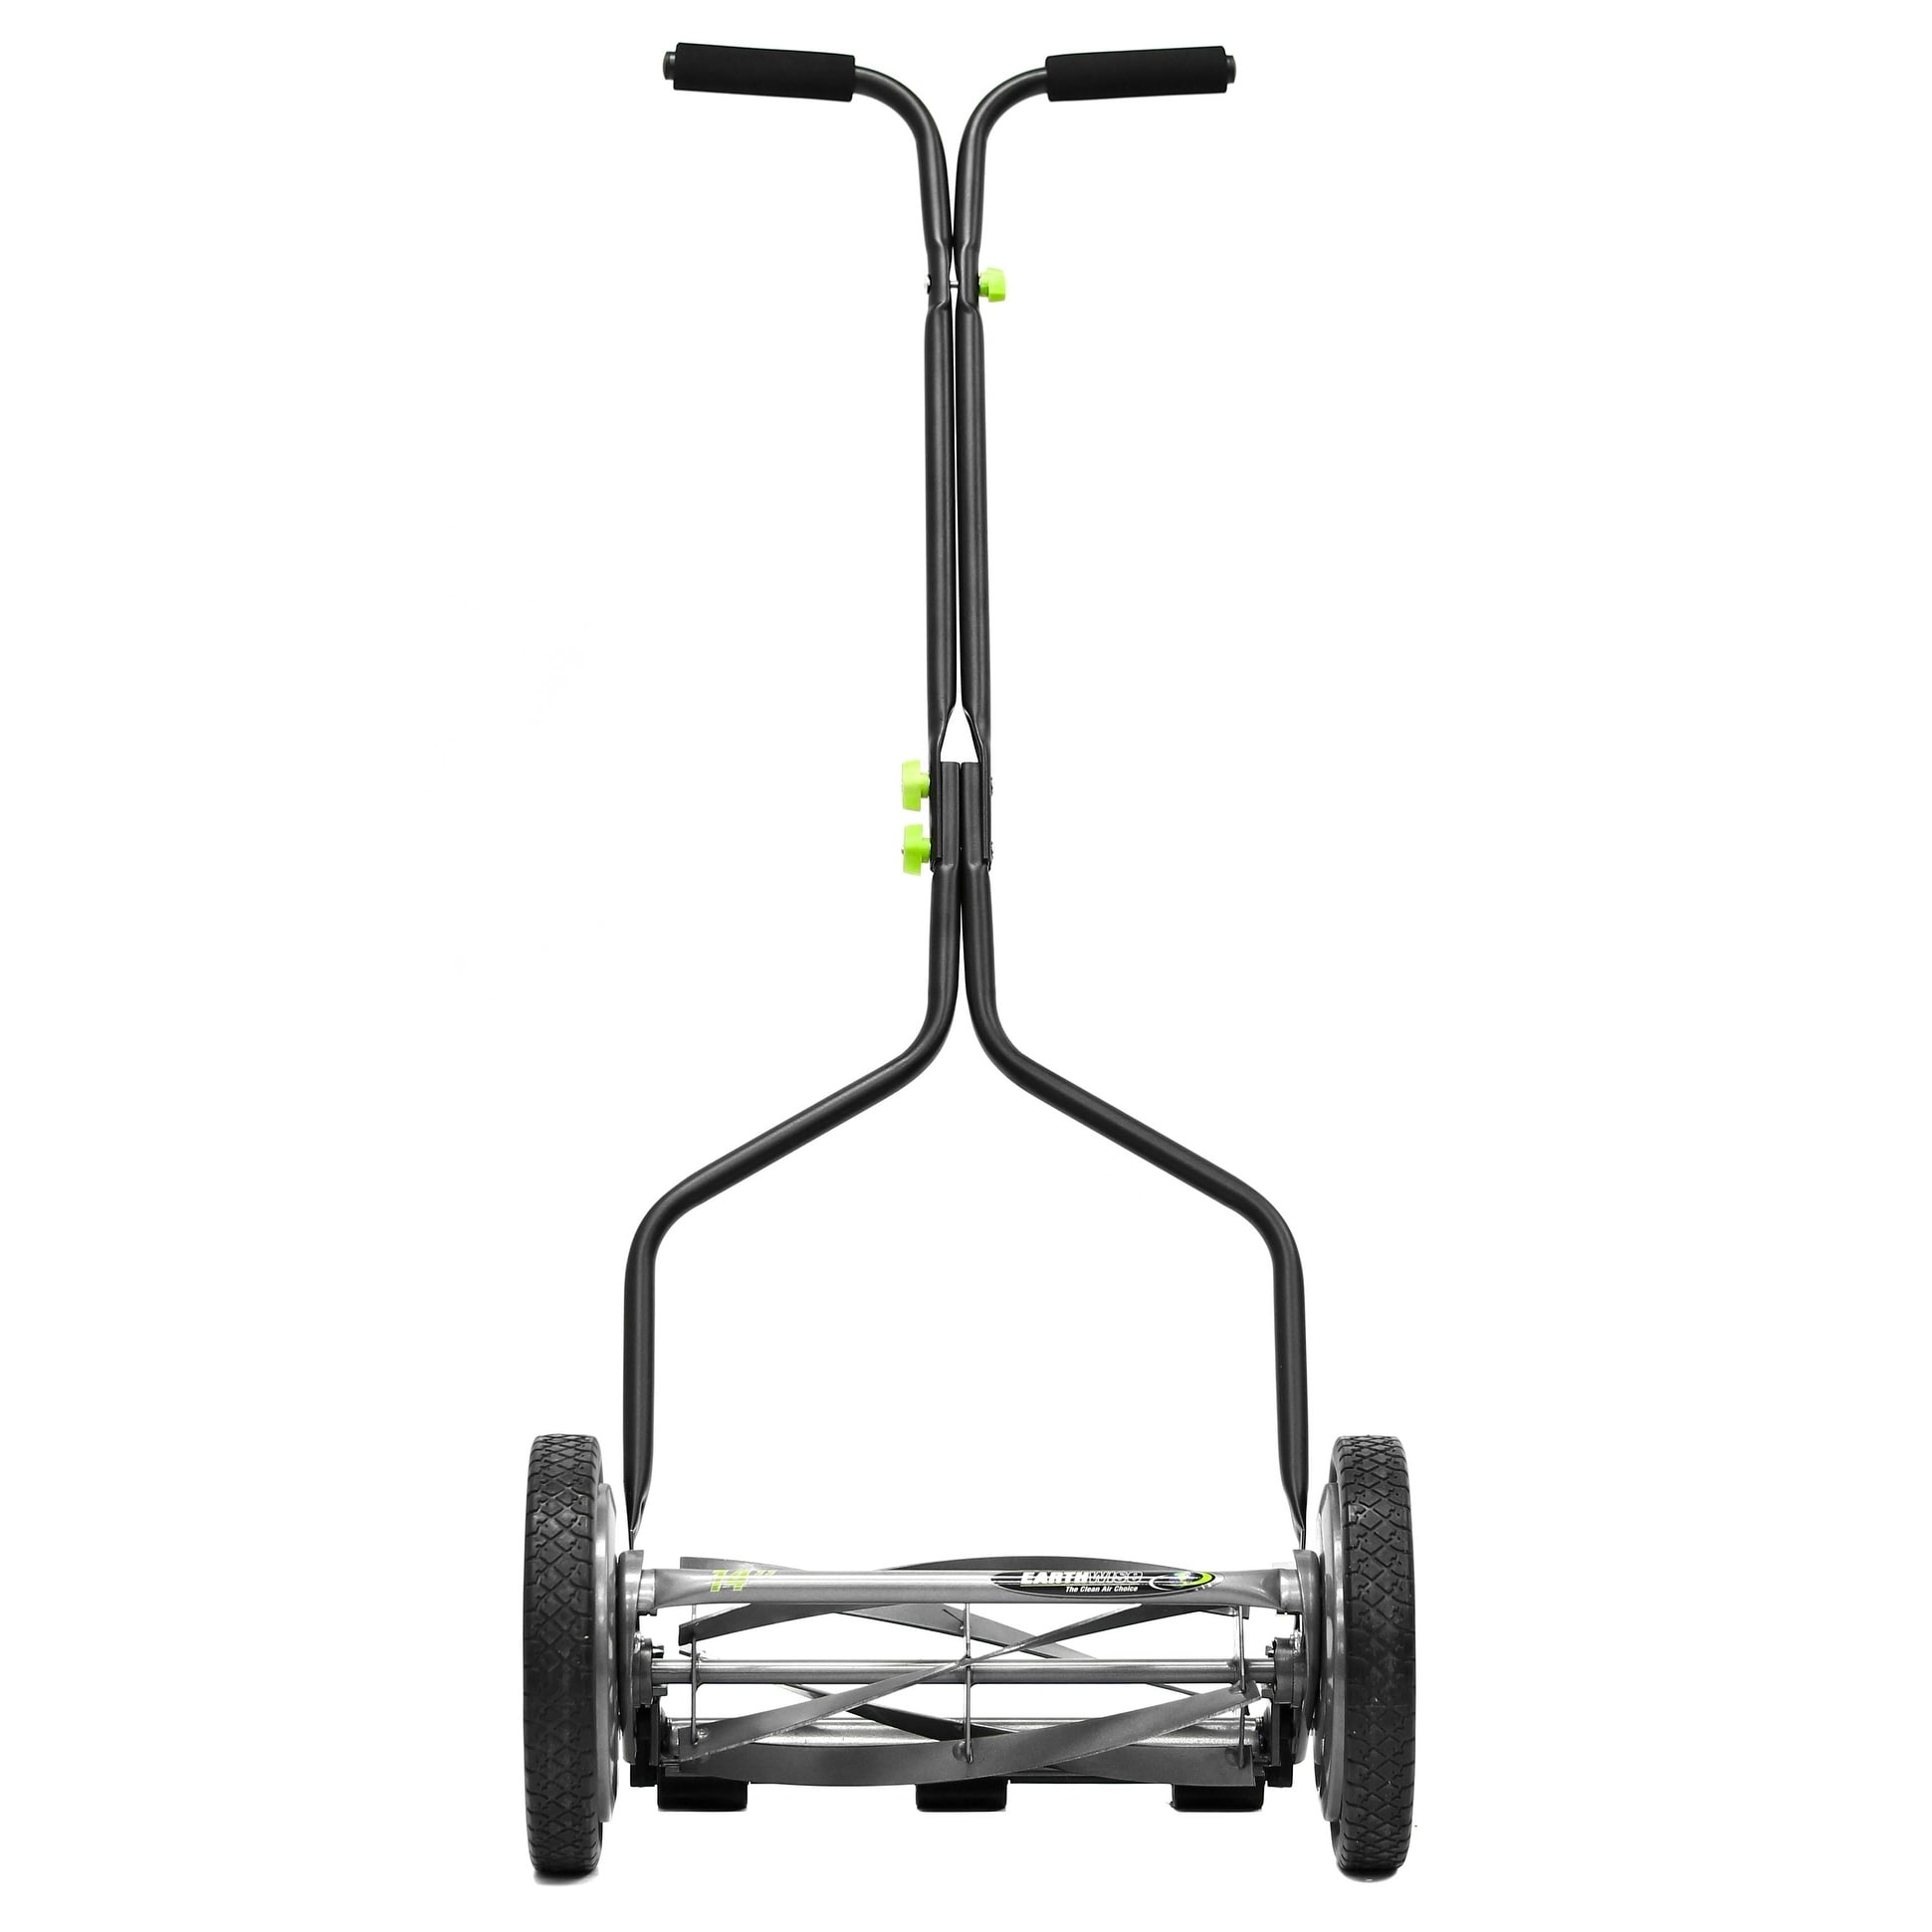 Top Rated Lawn Mowers - Bed Bath & Beyond